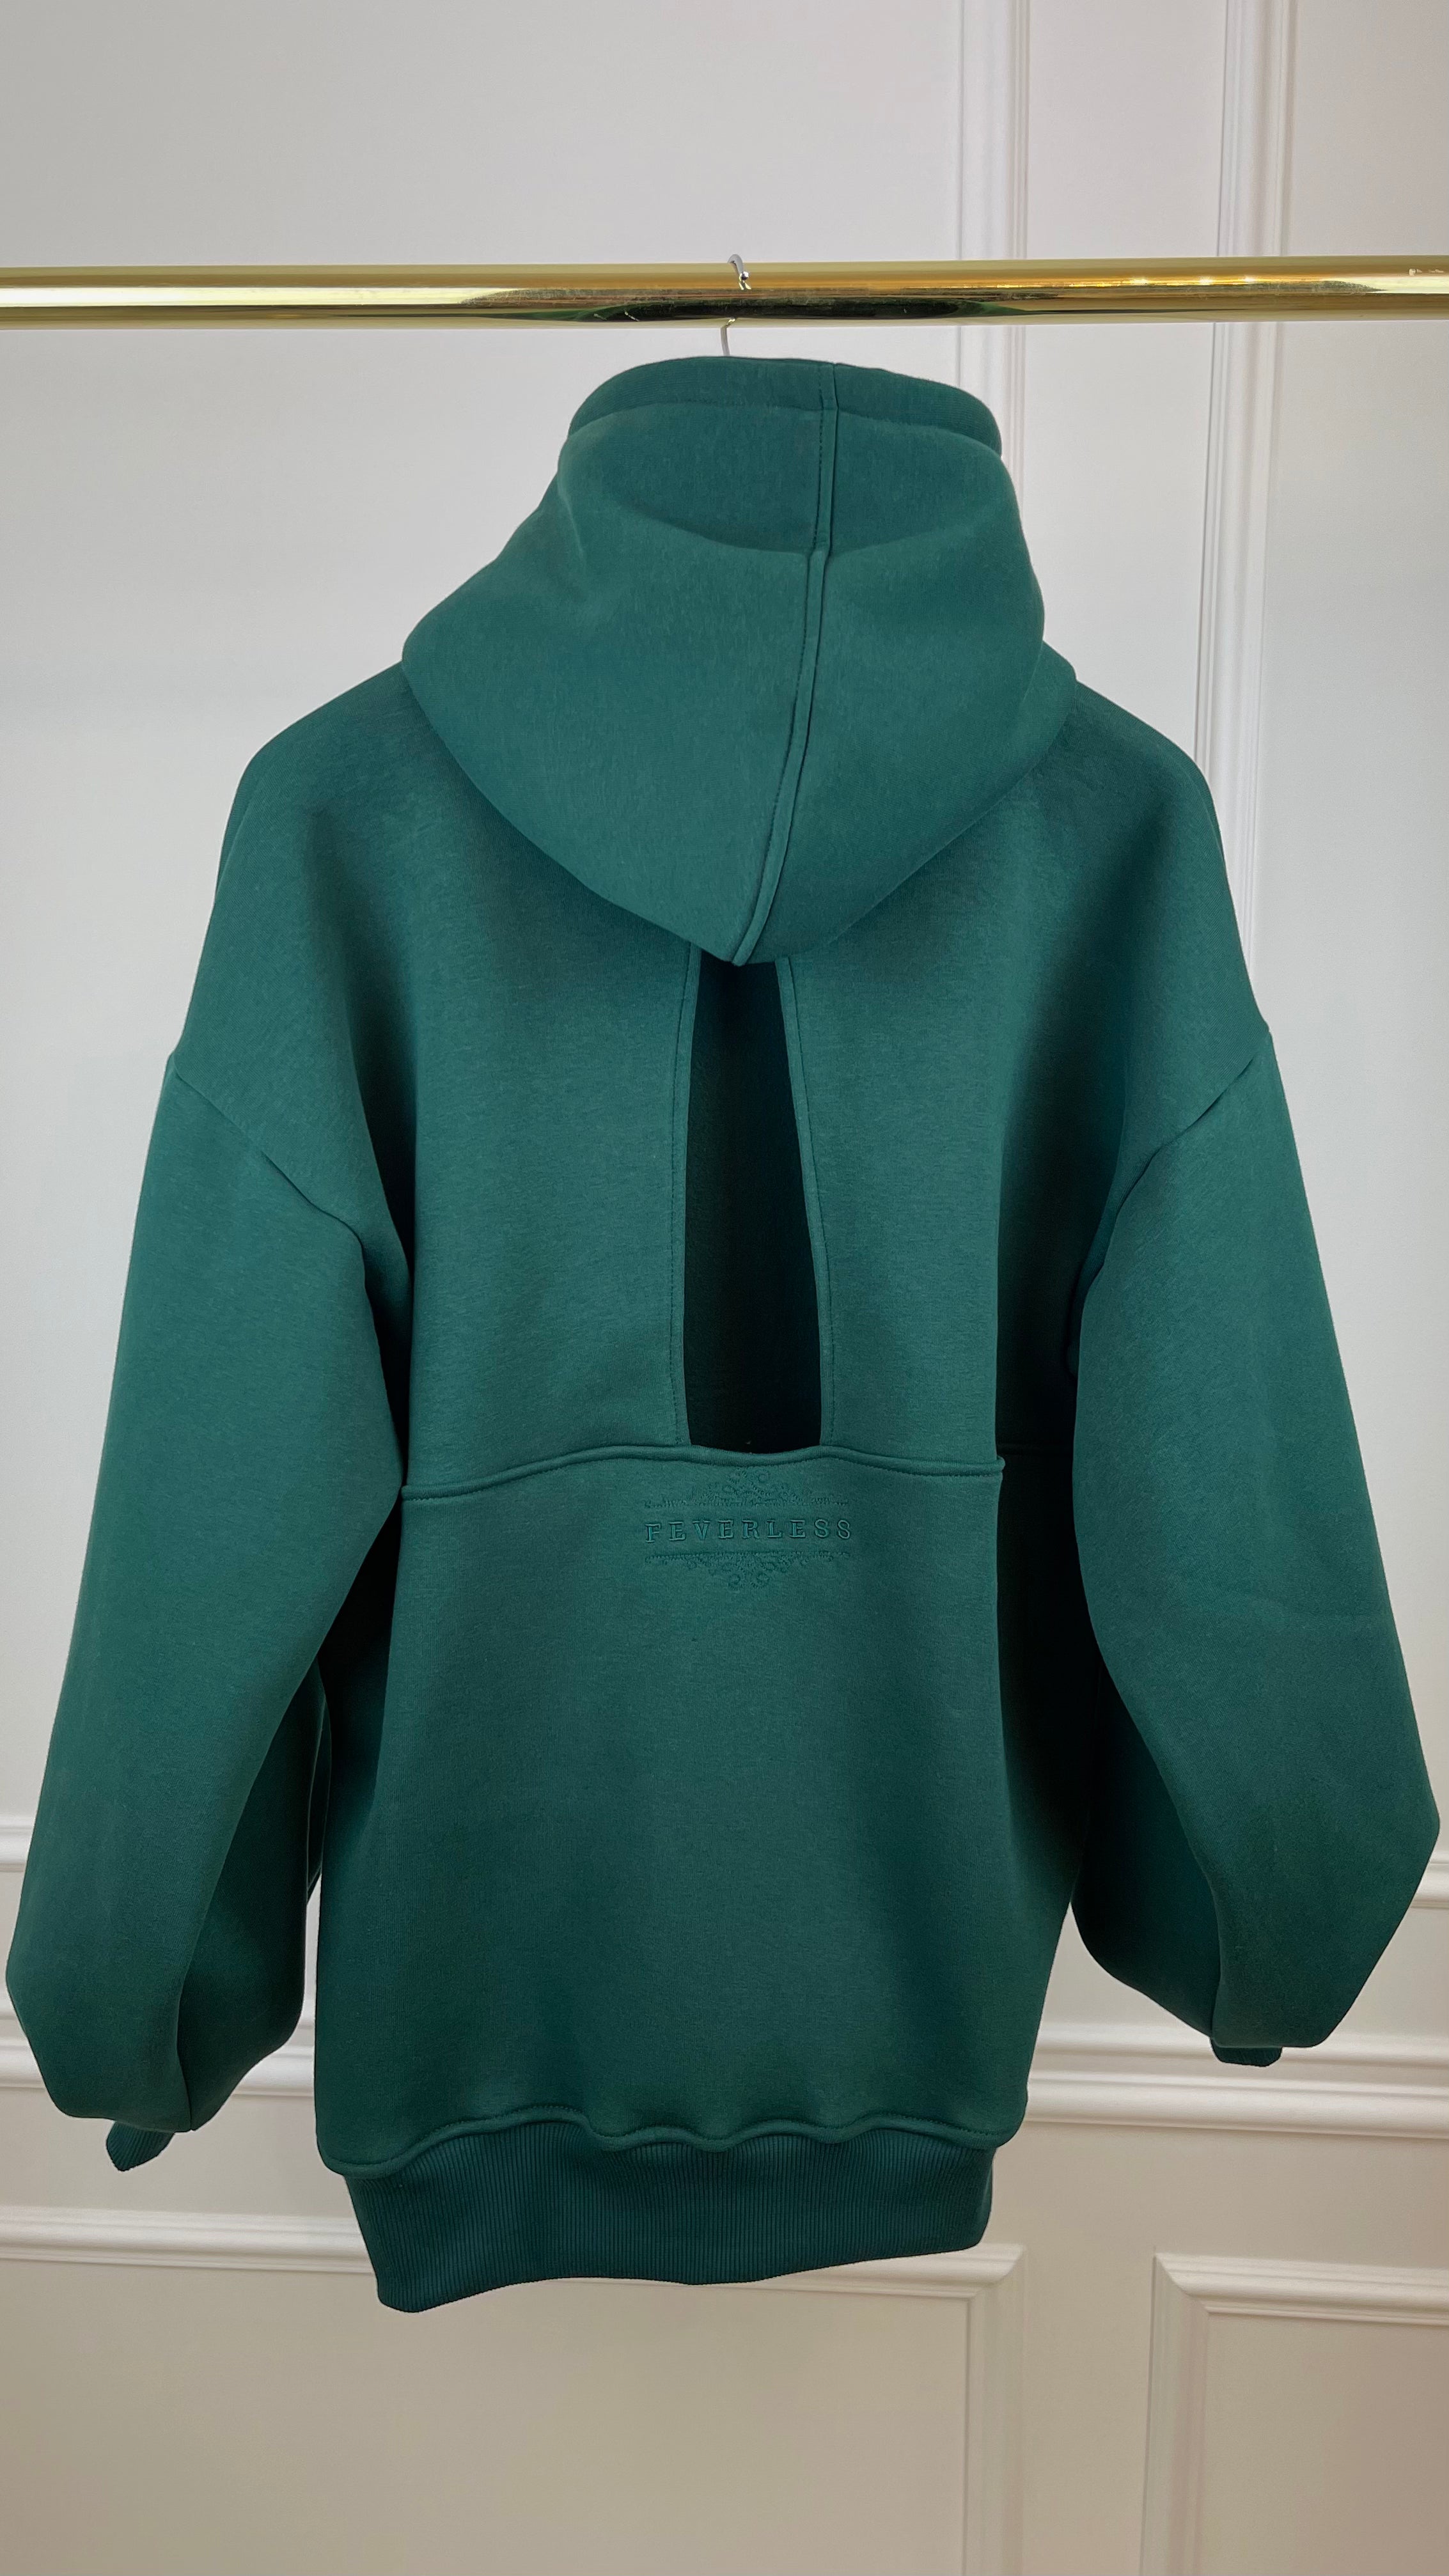 "Blush" Hoodie with Open back and Bell Sleeves, Emerald Green